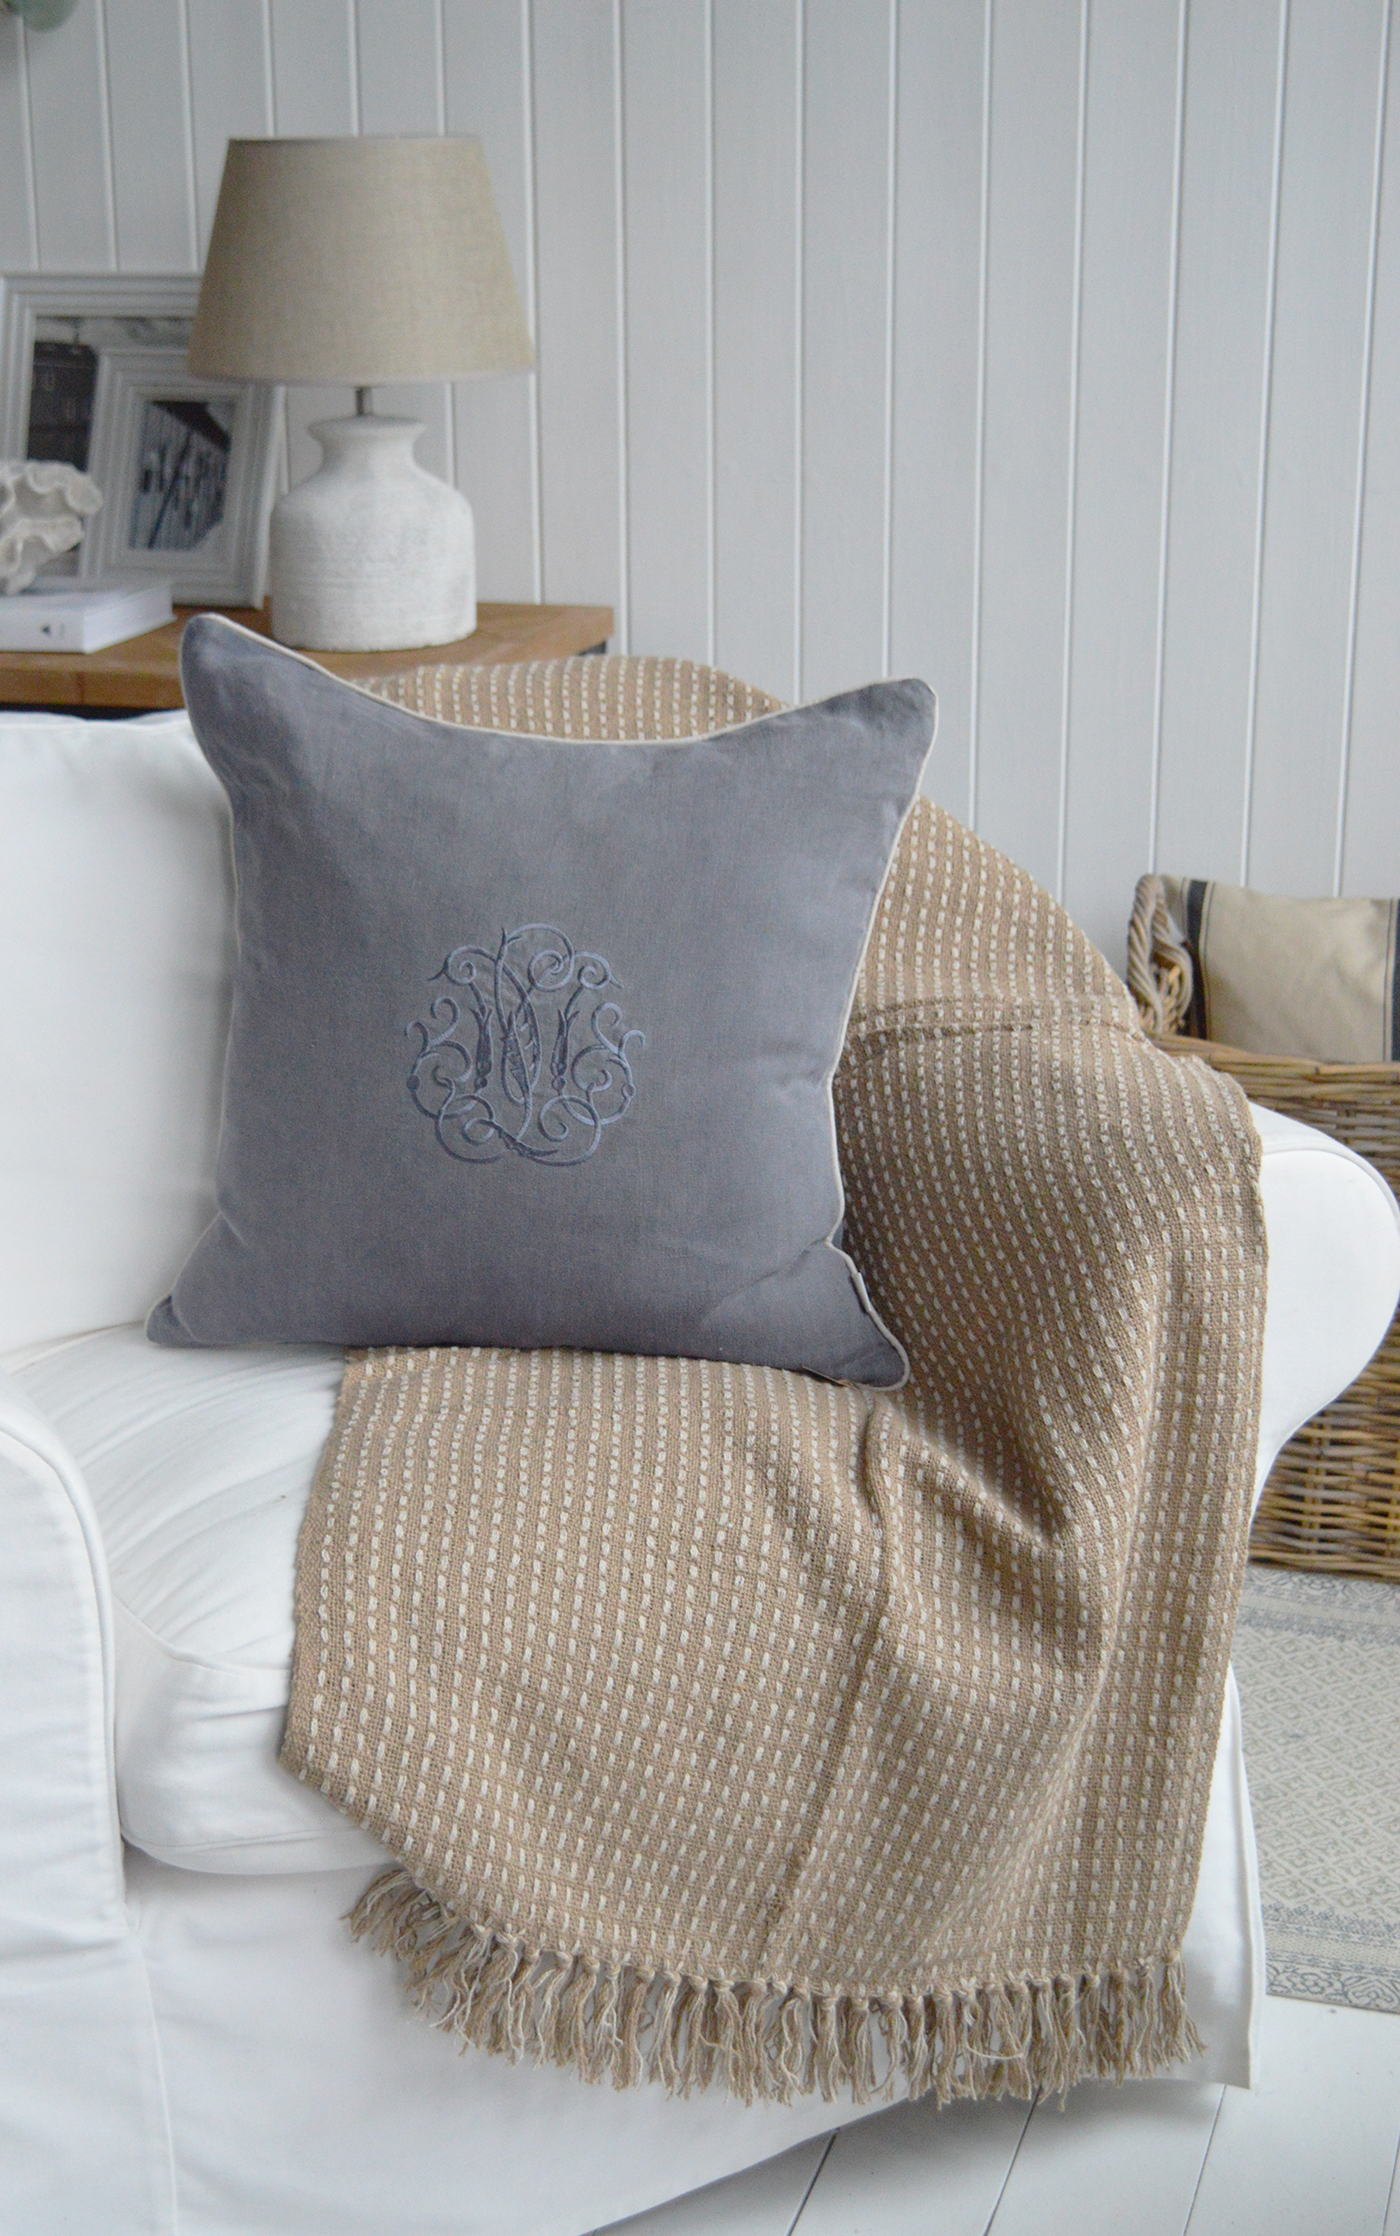 Camden range of throws, for New England style homes modern farmhouse, country and coastal interiors